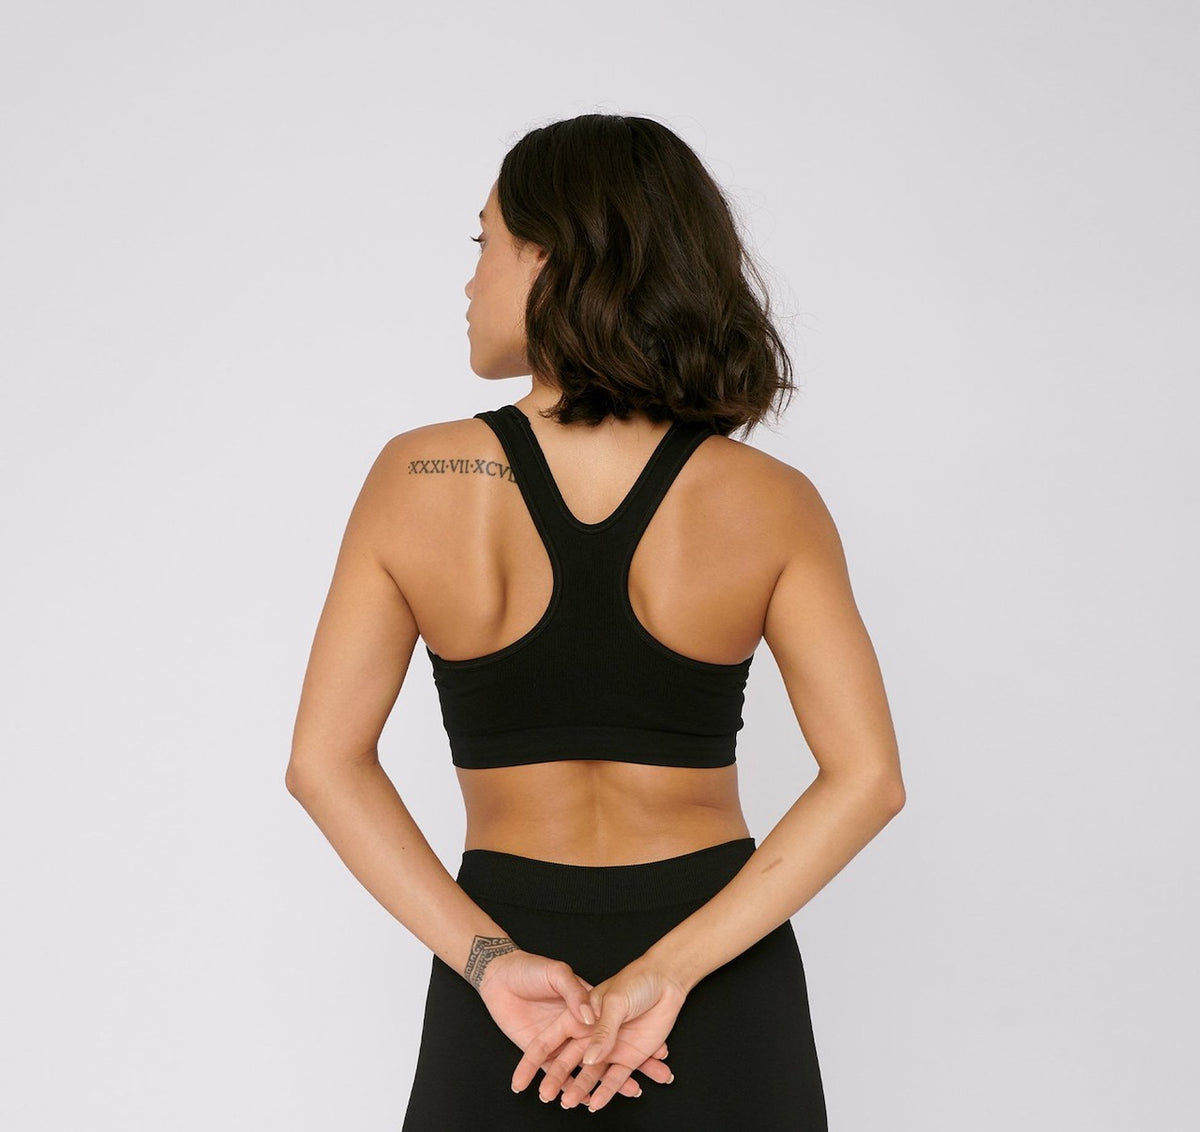 The back view of a woman wearing an Organic Basics SilverTech™ Active Workout Bra – Black and leggings.